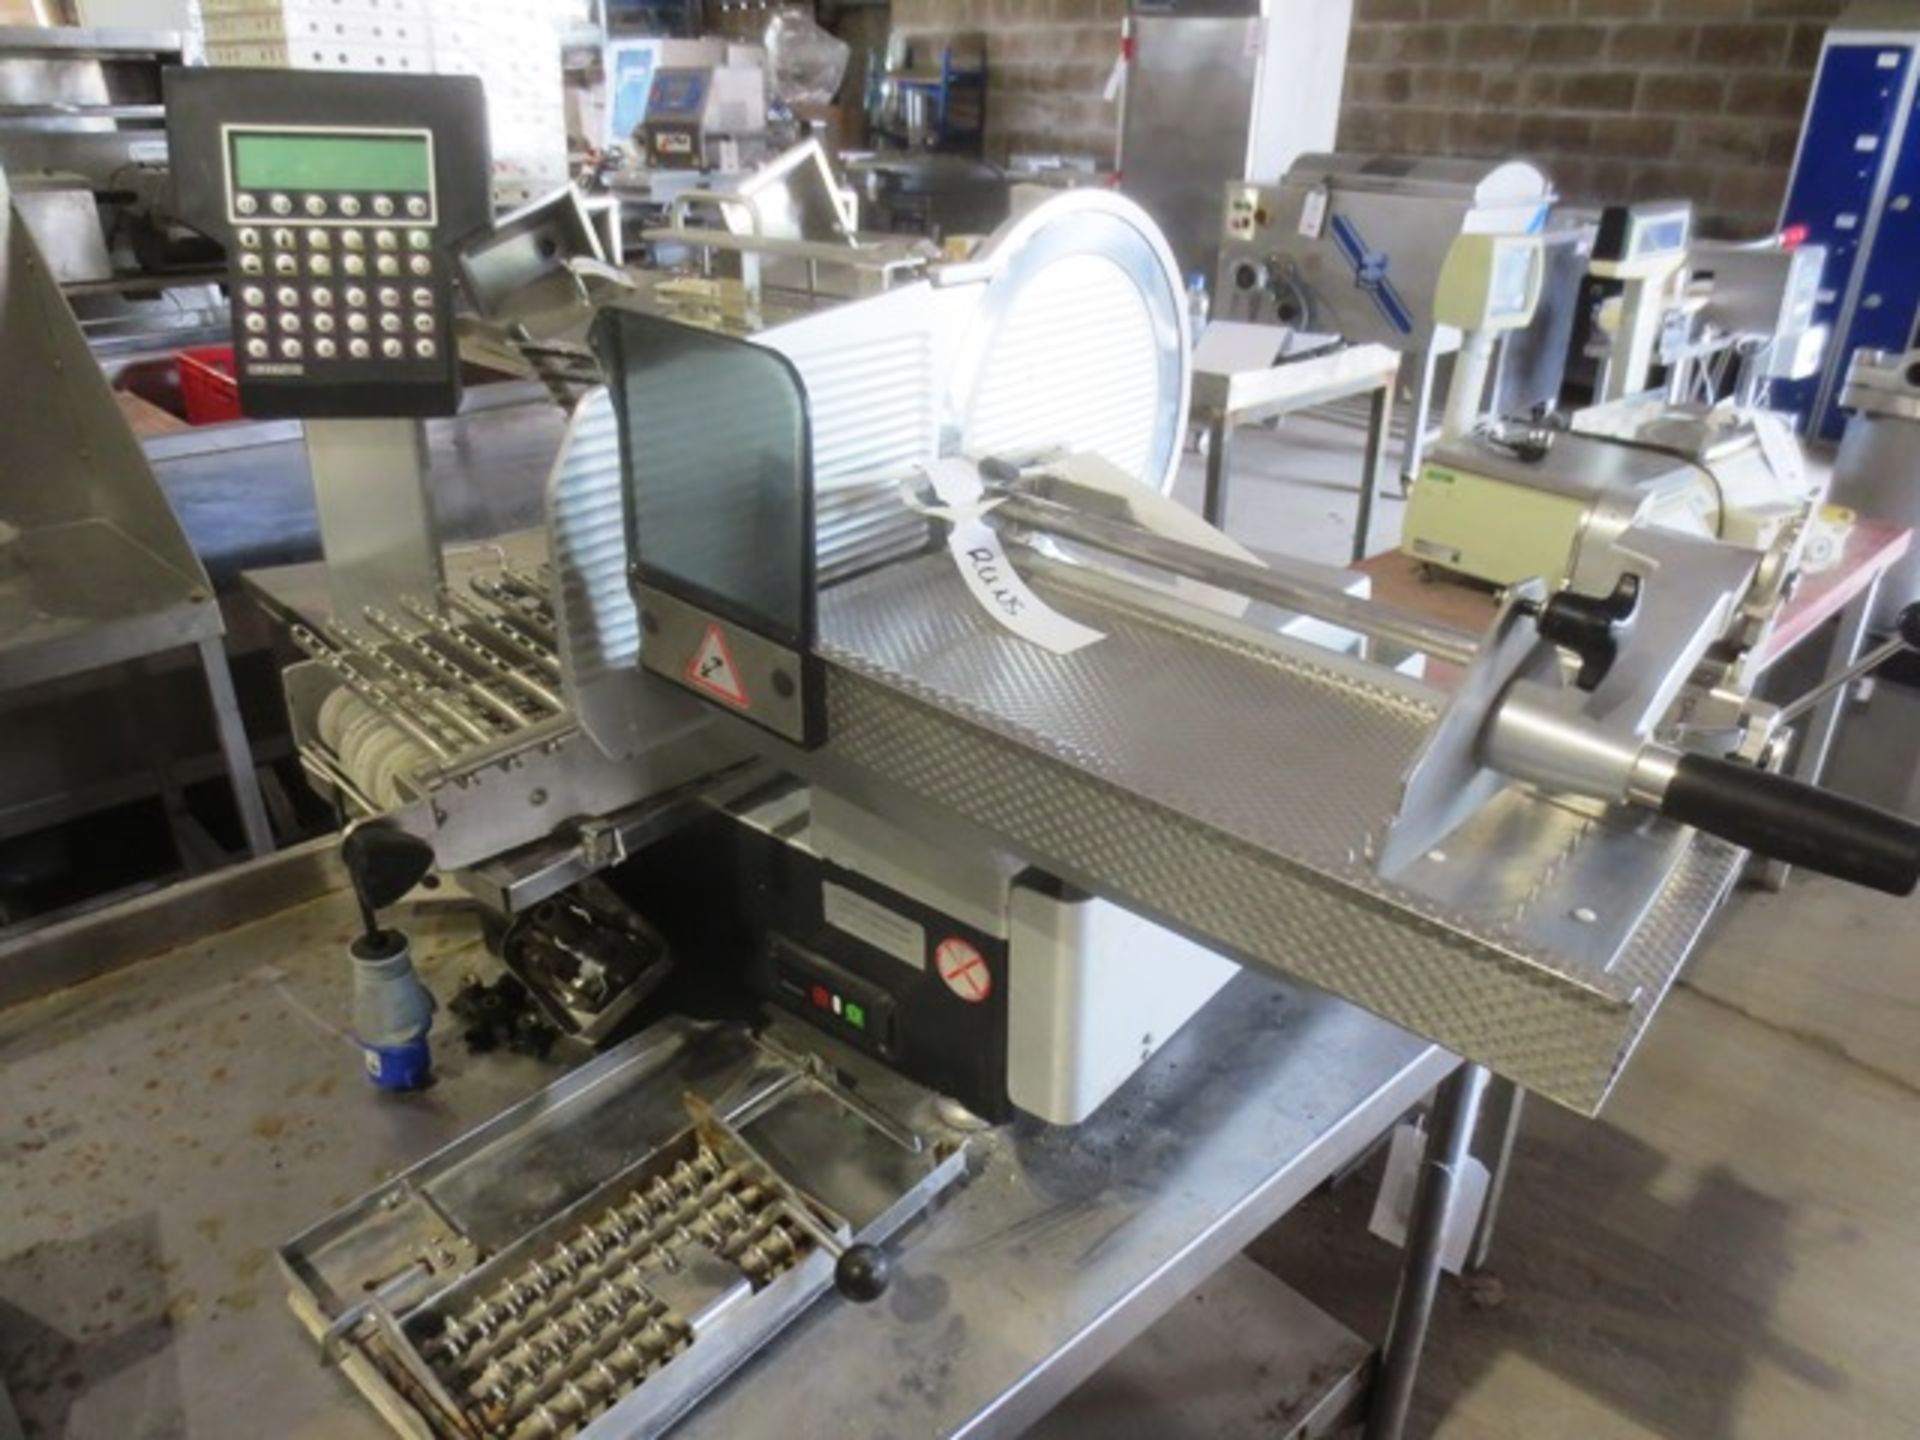 Bizerba stainless steel bench top slicer, model A404, serial no: 10169454, 240v, with digital - Image 2 of 3